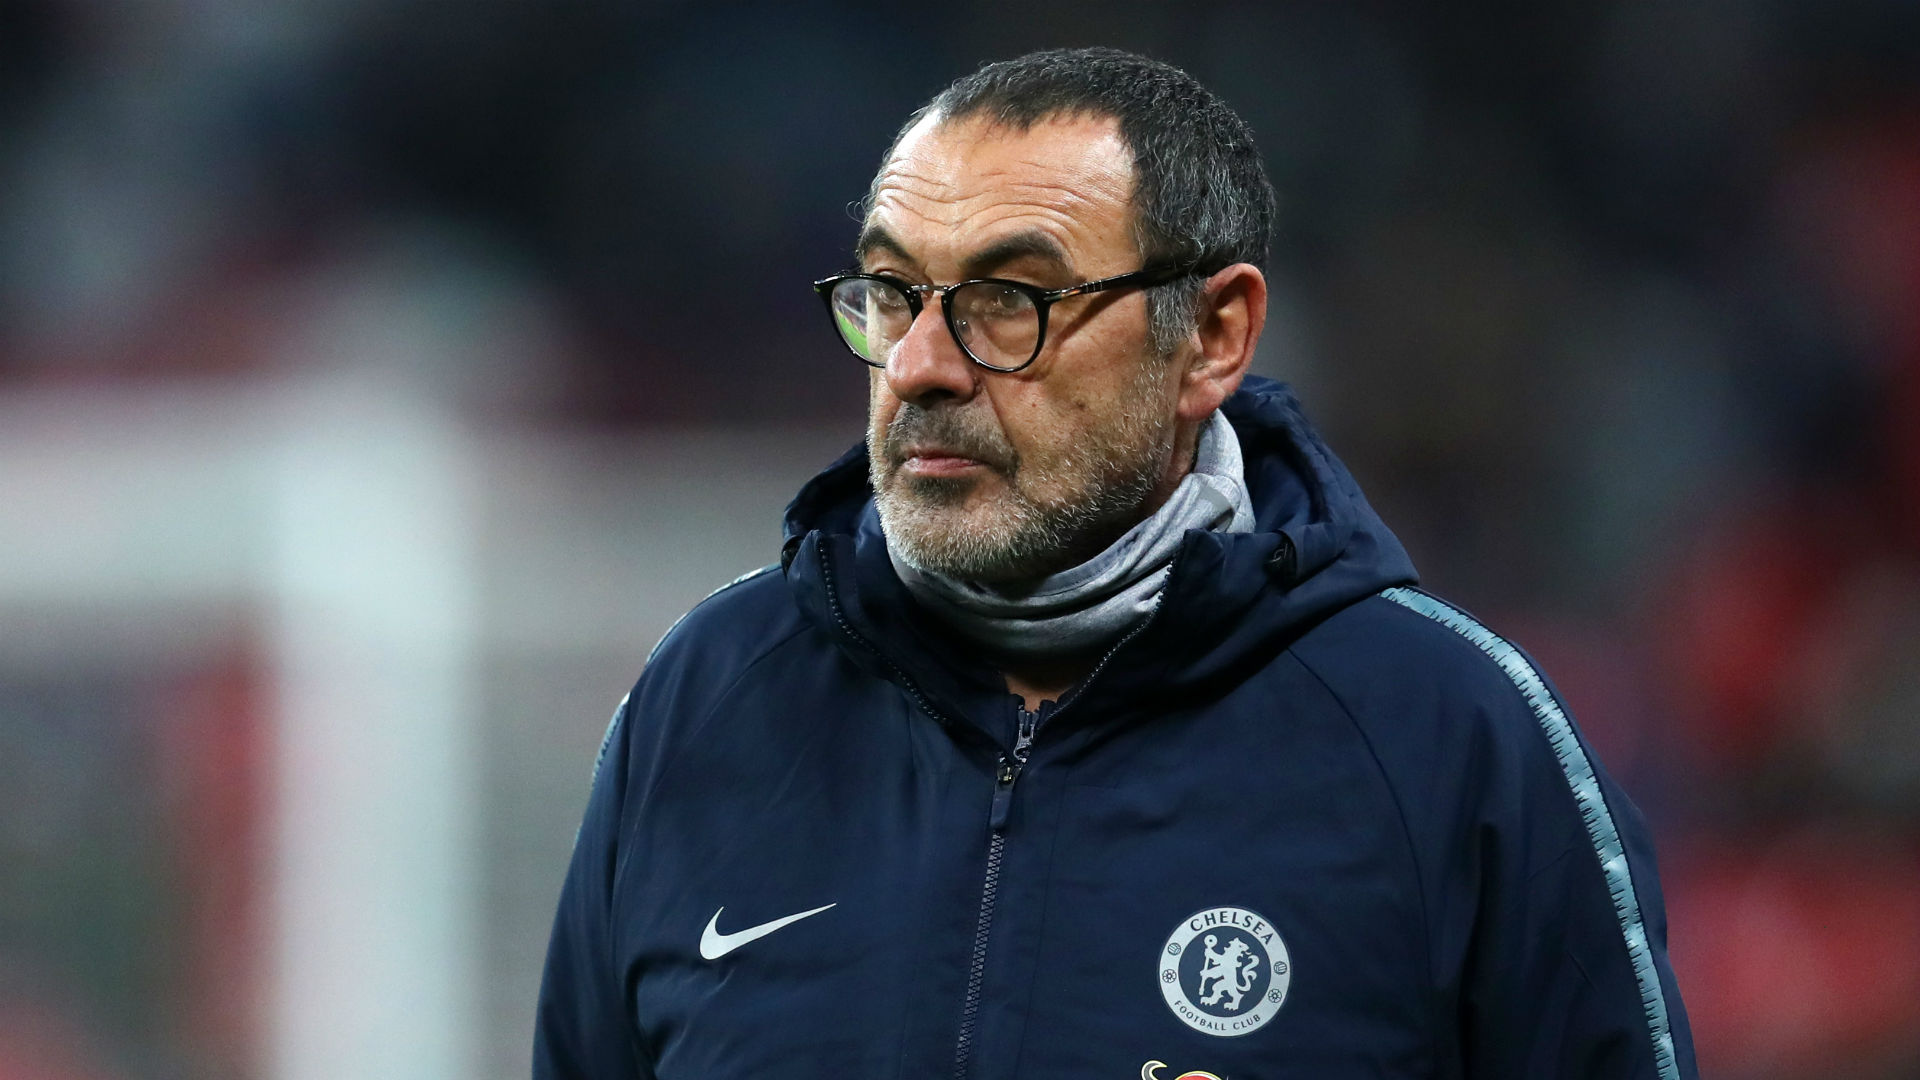 With a replacement for Cesc Fabregas needed and Gonzalo Higuain said to be a target, Maurizio Sarri is optimistic about January signings.